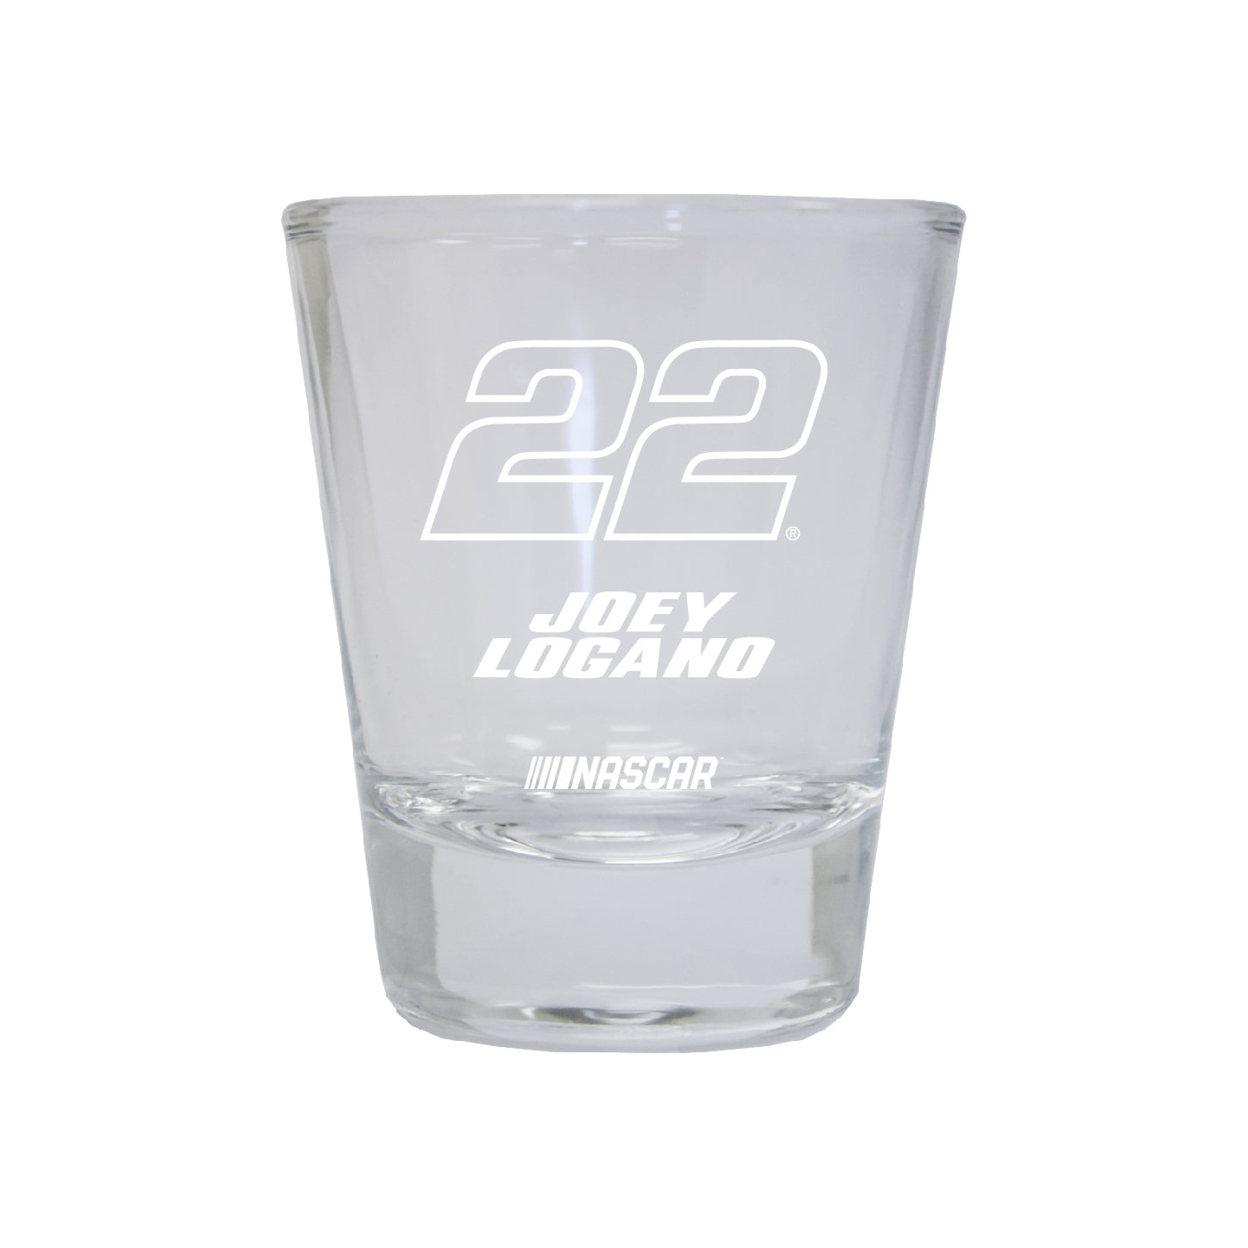 Joey Logano #22 Nascar Etched Round Shot Glass New For 2022